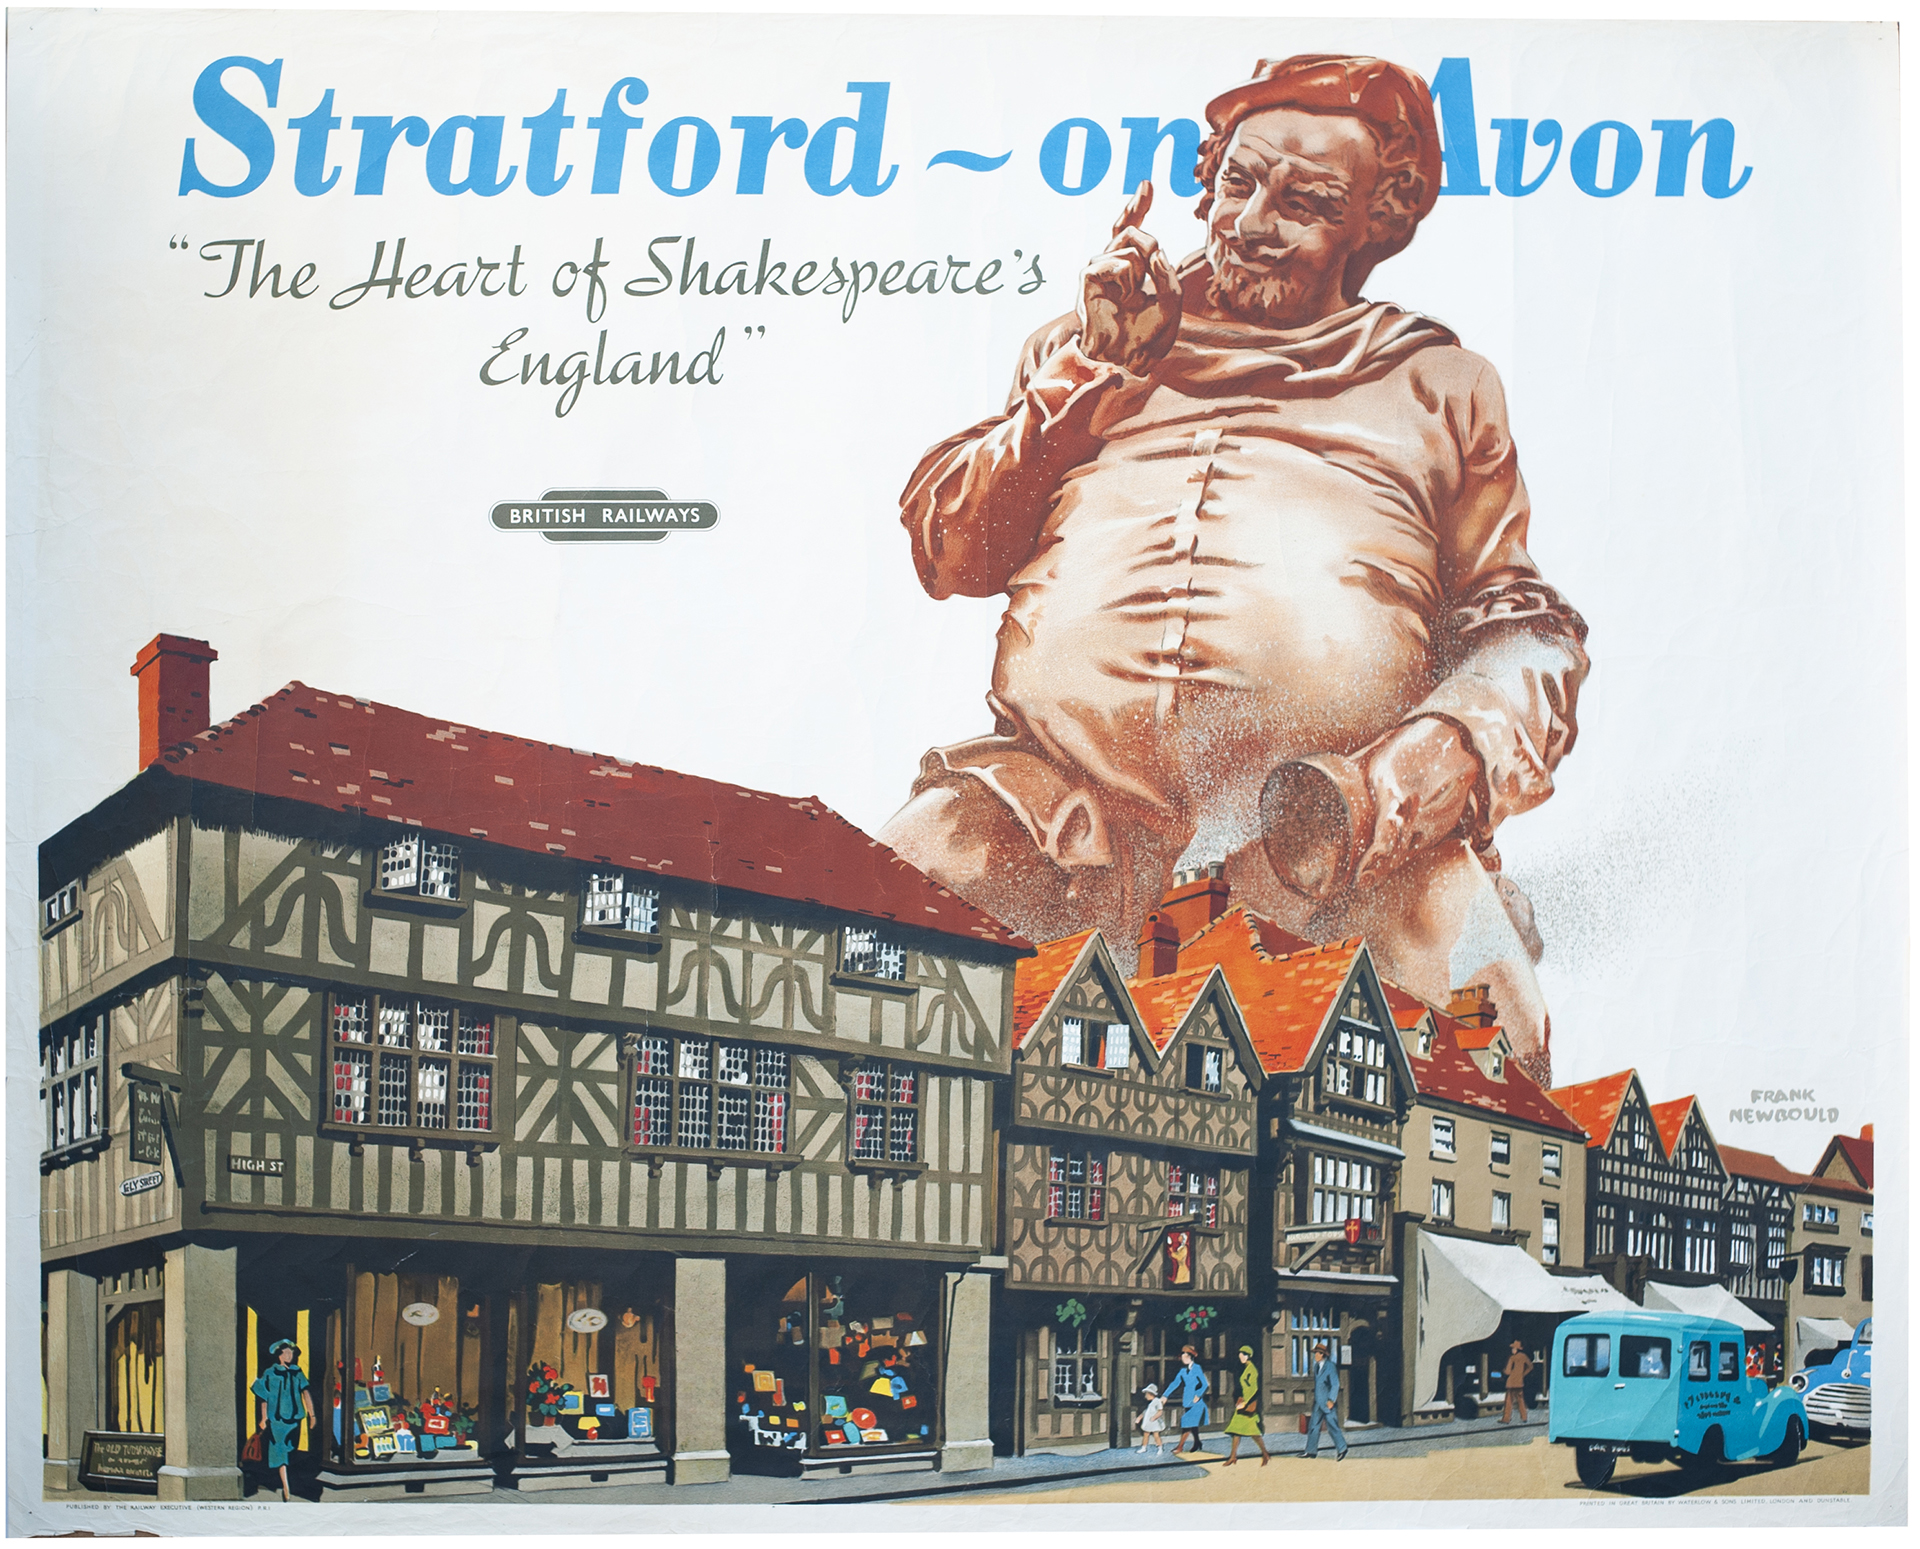 Poster BR(W) STRATFORD-ON-AVON THE HEART OF SHAKESPEARES ENGLAND by Frank Newbould. Quad Royal